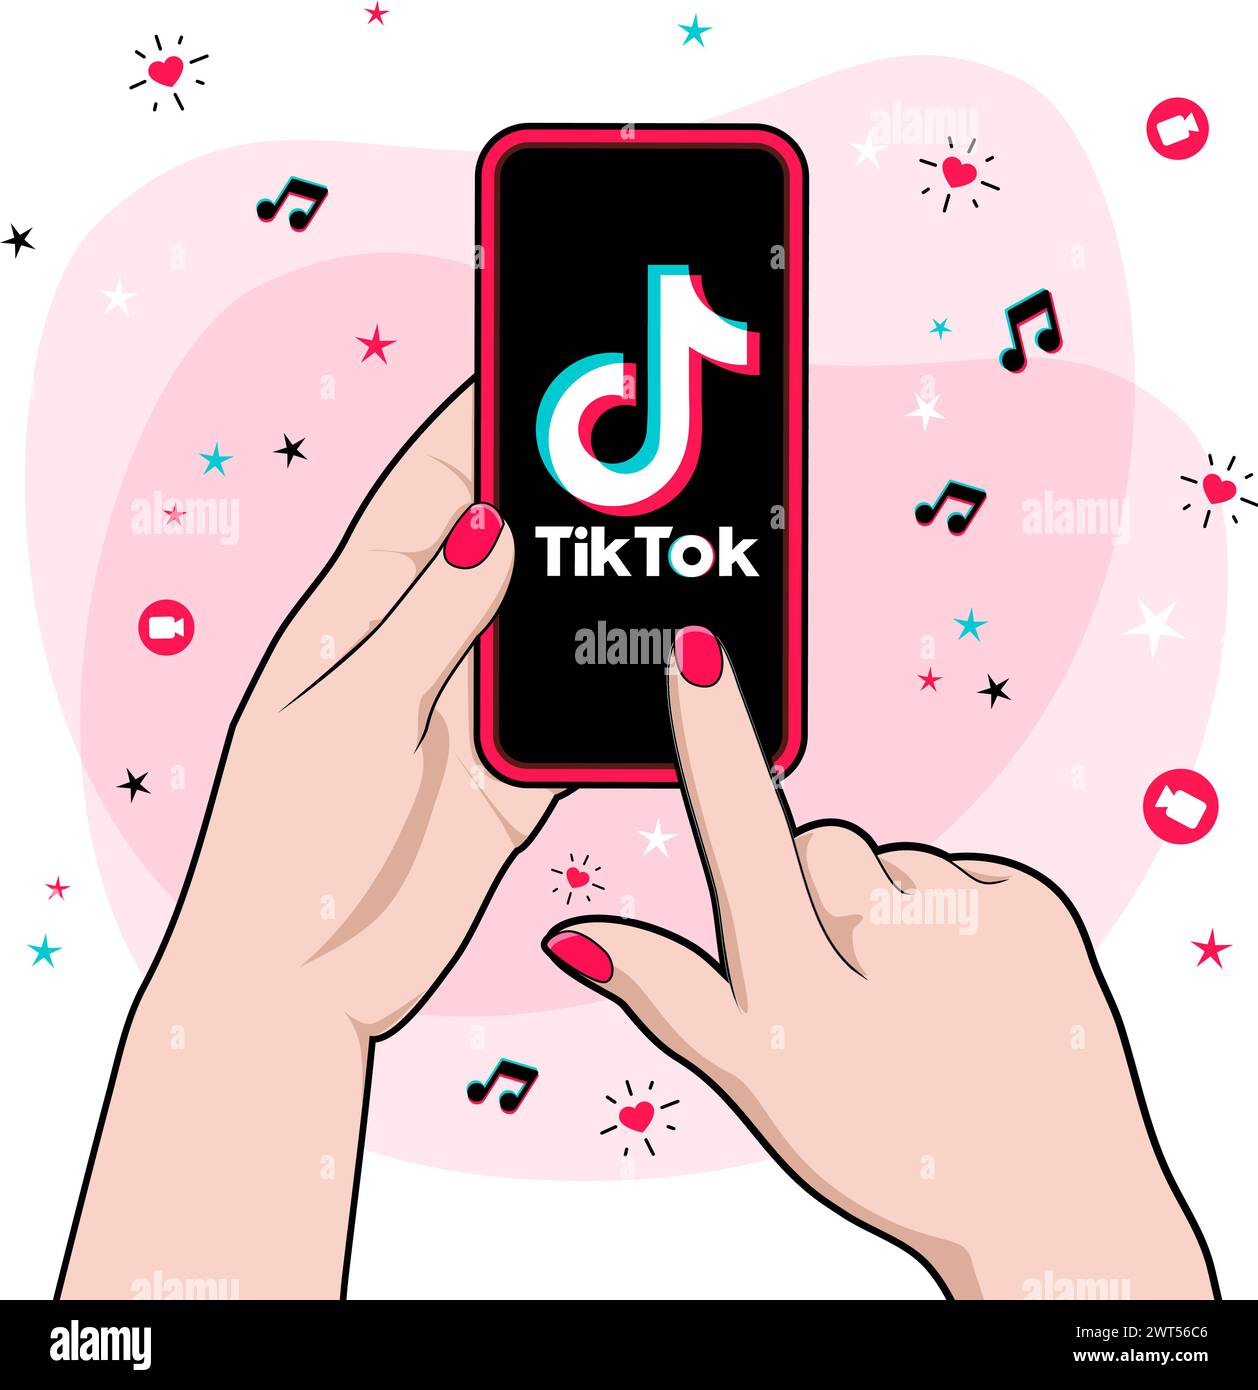 Hand of woman holding smartphone with Tiktok logo in the screen. Entertainment short video social network. Vector illustration with teenage concept. Stock Vector